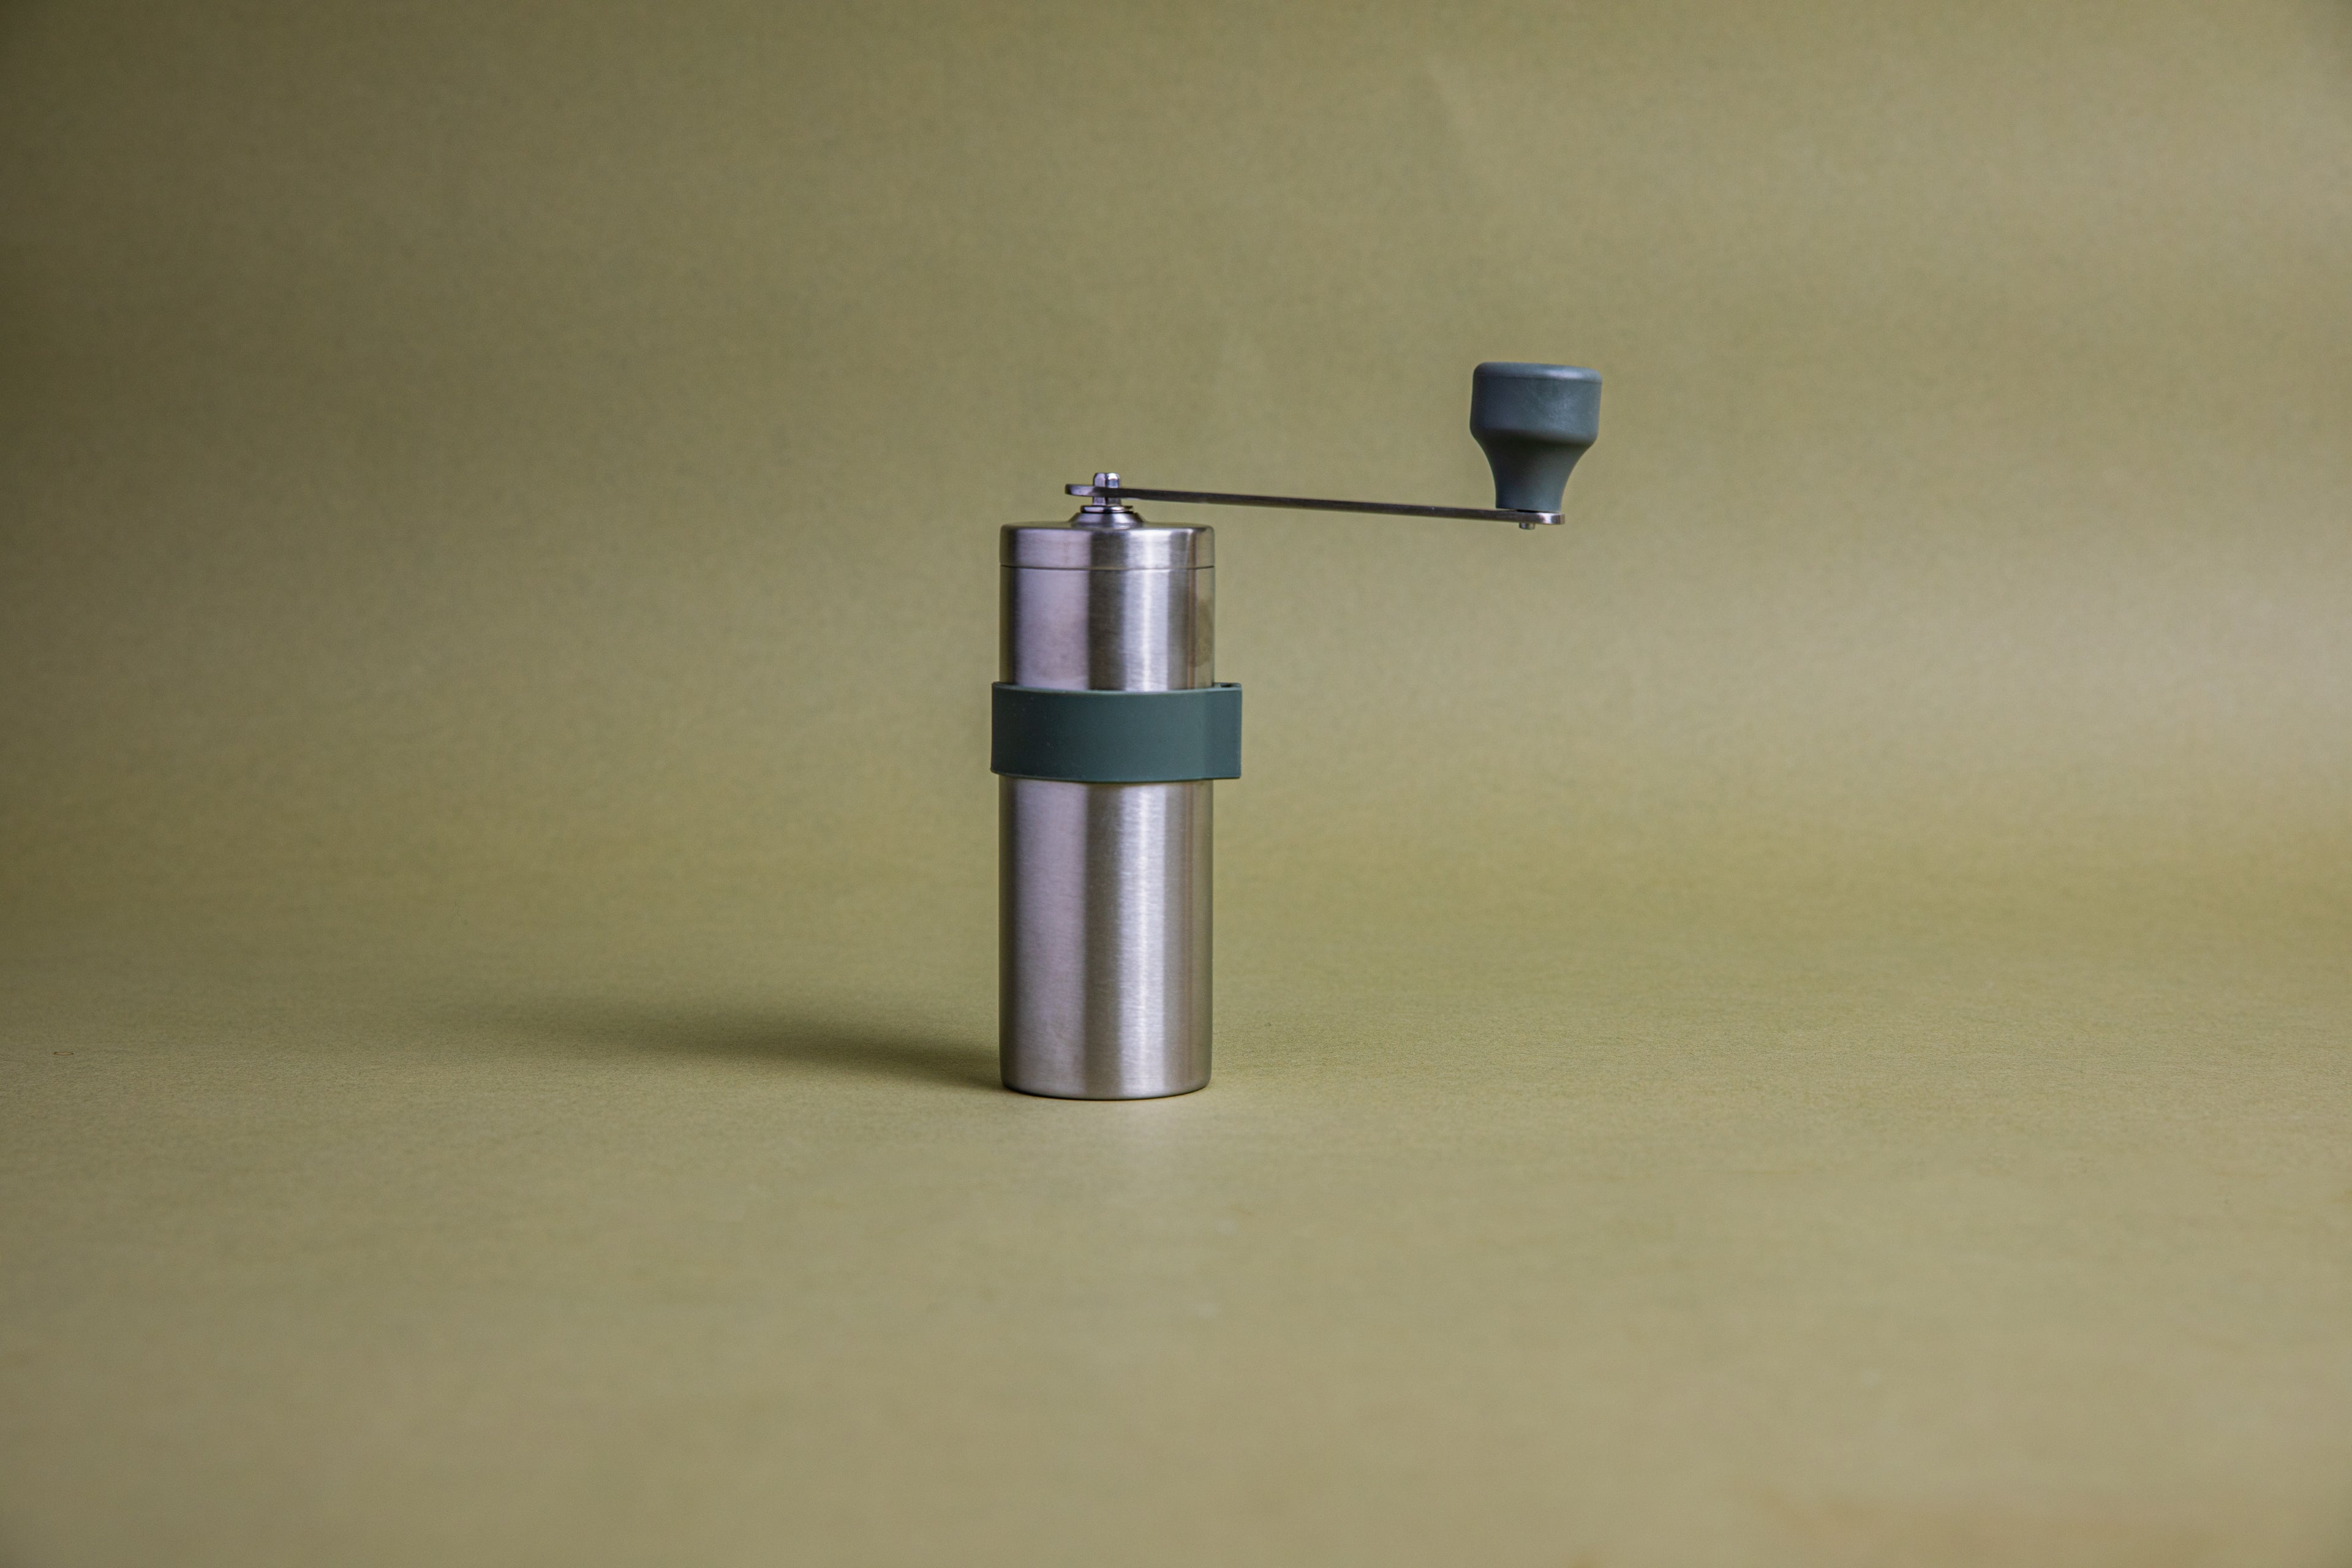 Stainless steel cylindrically shaped coffee mill cannister with forest green silicone band stainless steel handle with plastic knob. Set against an earth-tone background.